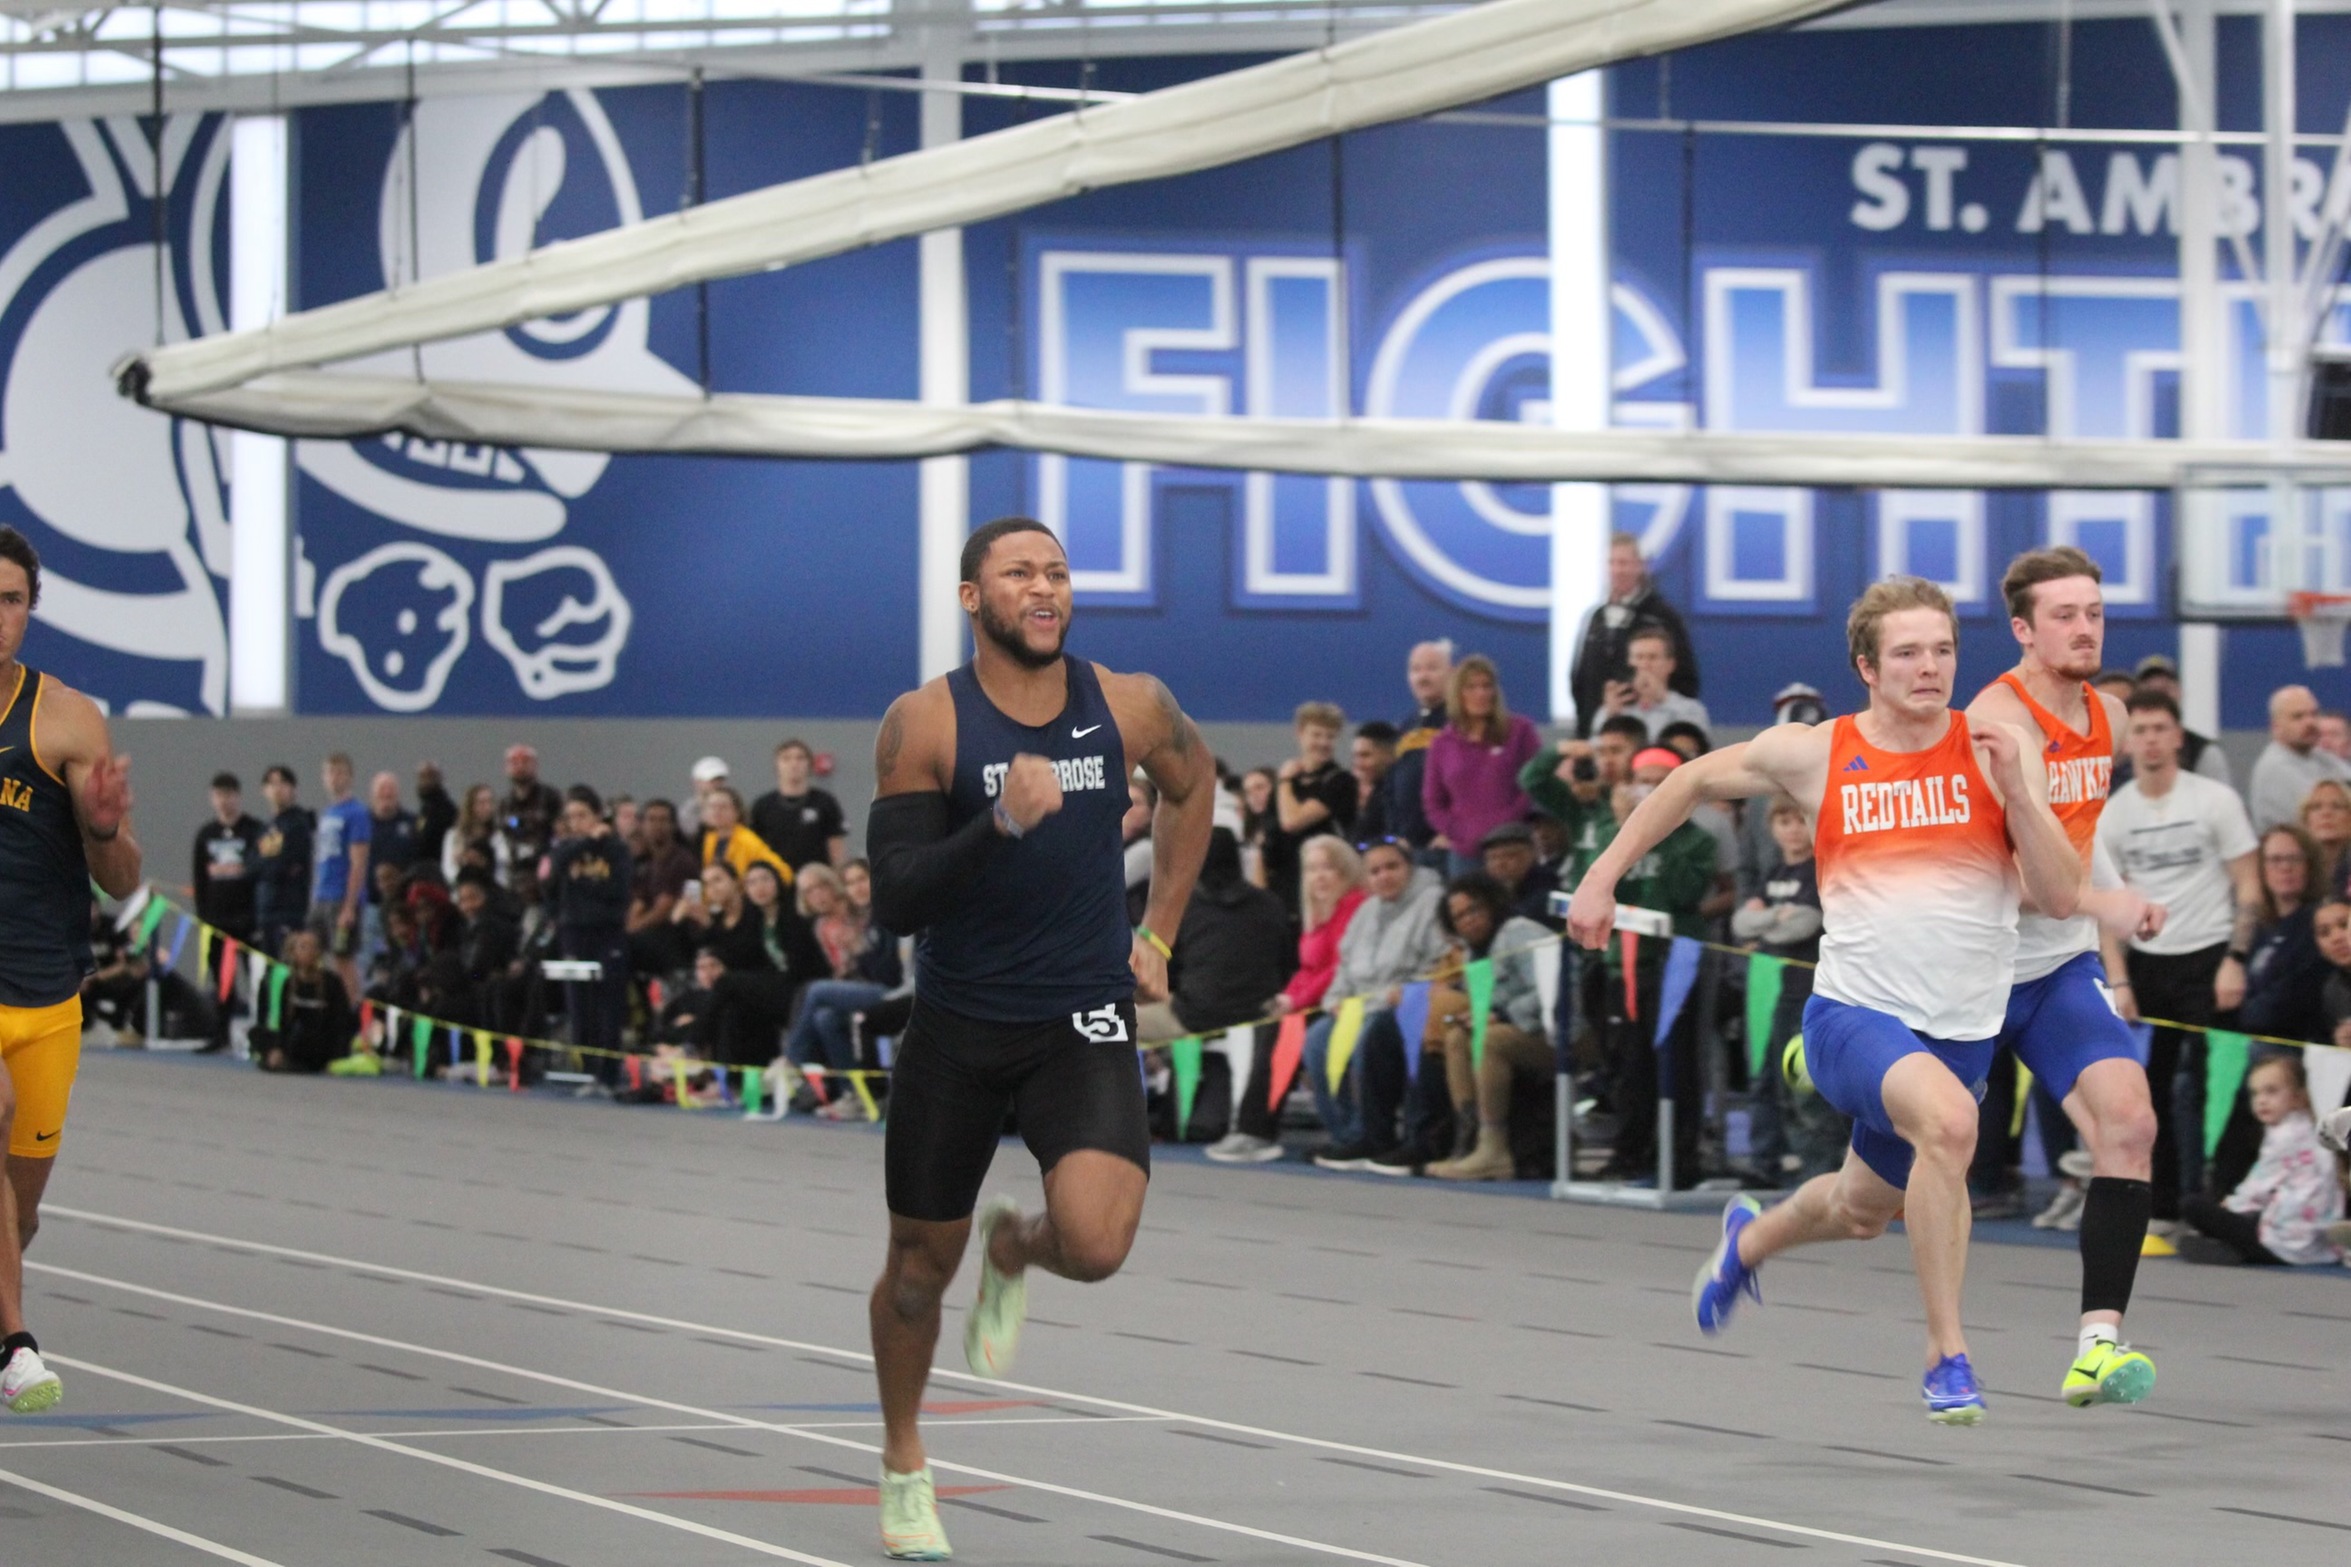 15 Bees qualify for the NAIA Indoor Track & Field National Championships